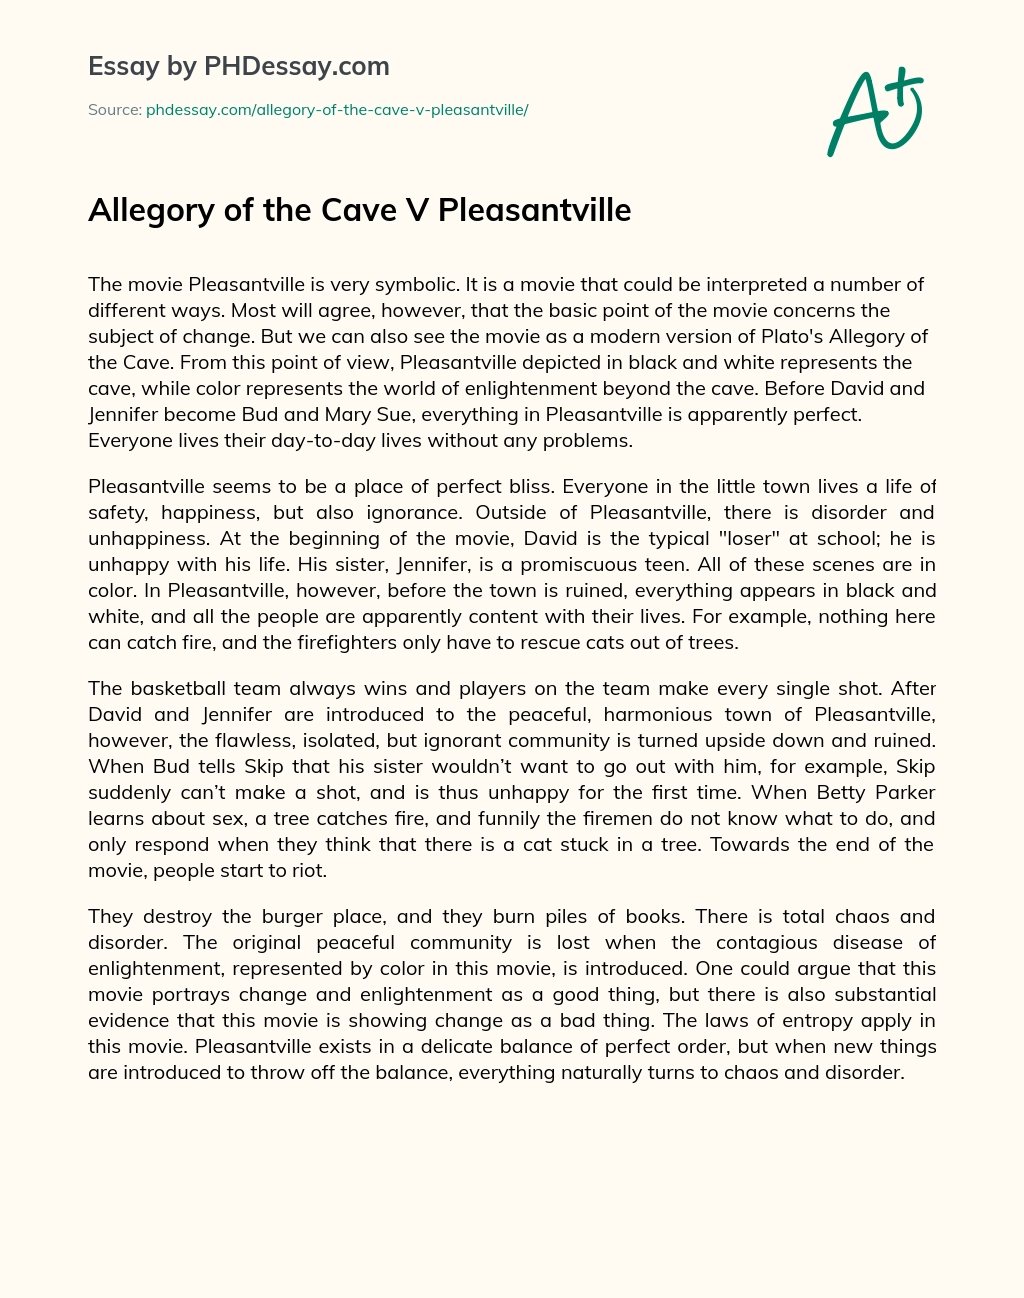 Allegory of the Cave V Pleasantville essay